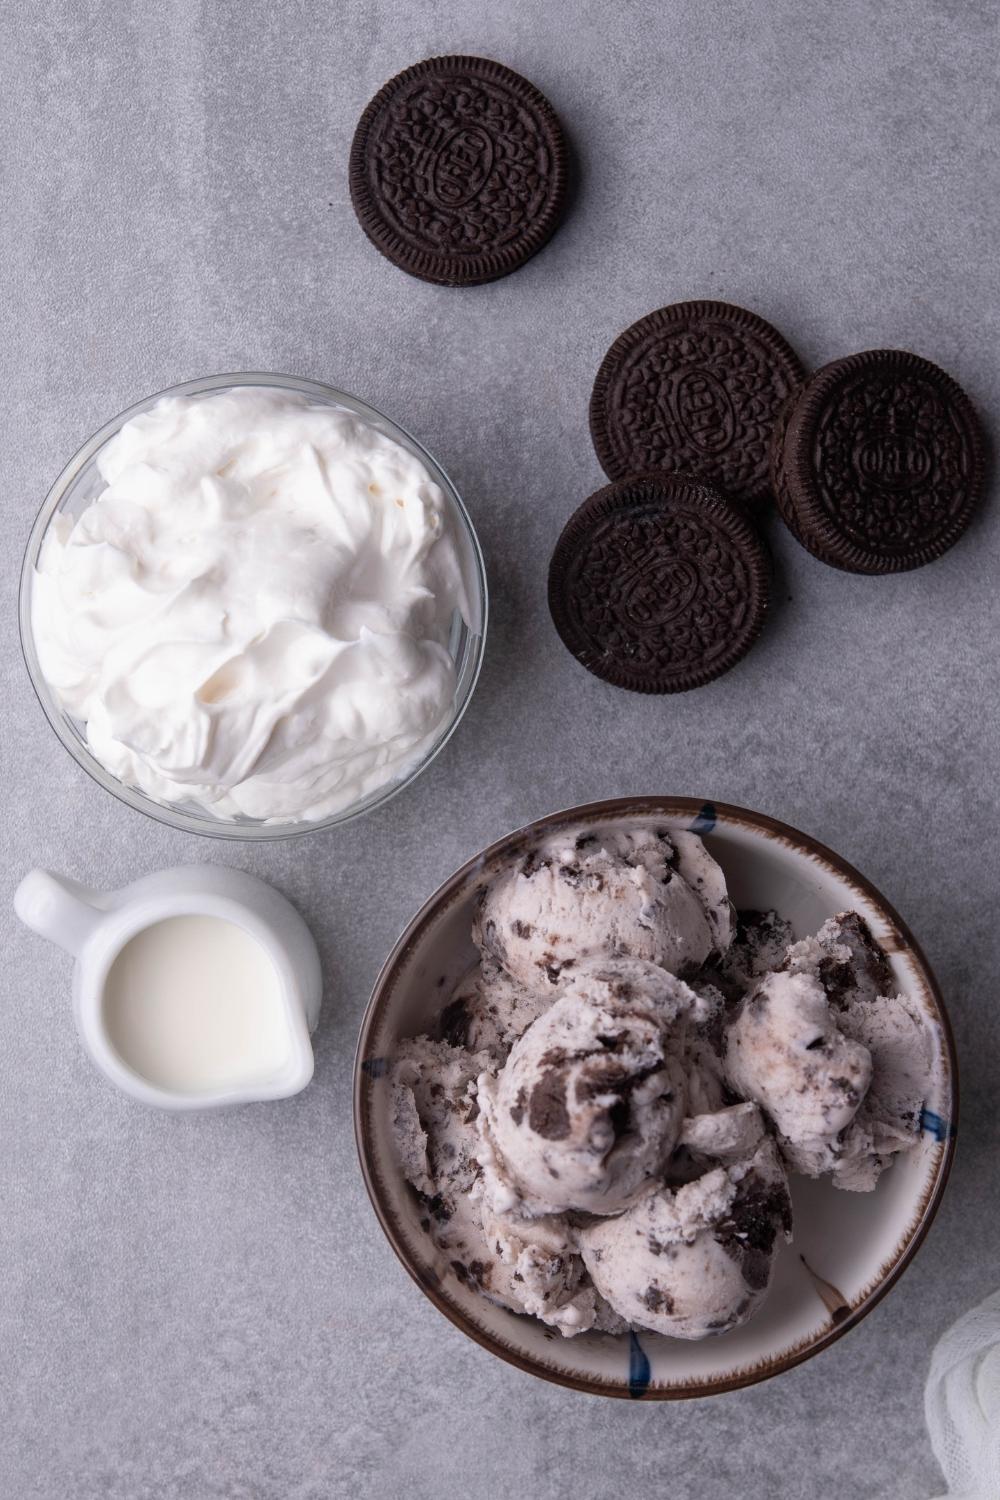 A countertop with a bowl of cookies and cream ice cream, a bowl of cool whip, a small pitcher with milk, and 4 whole oreo cookies.